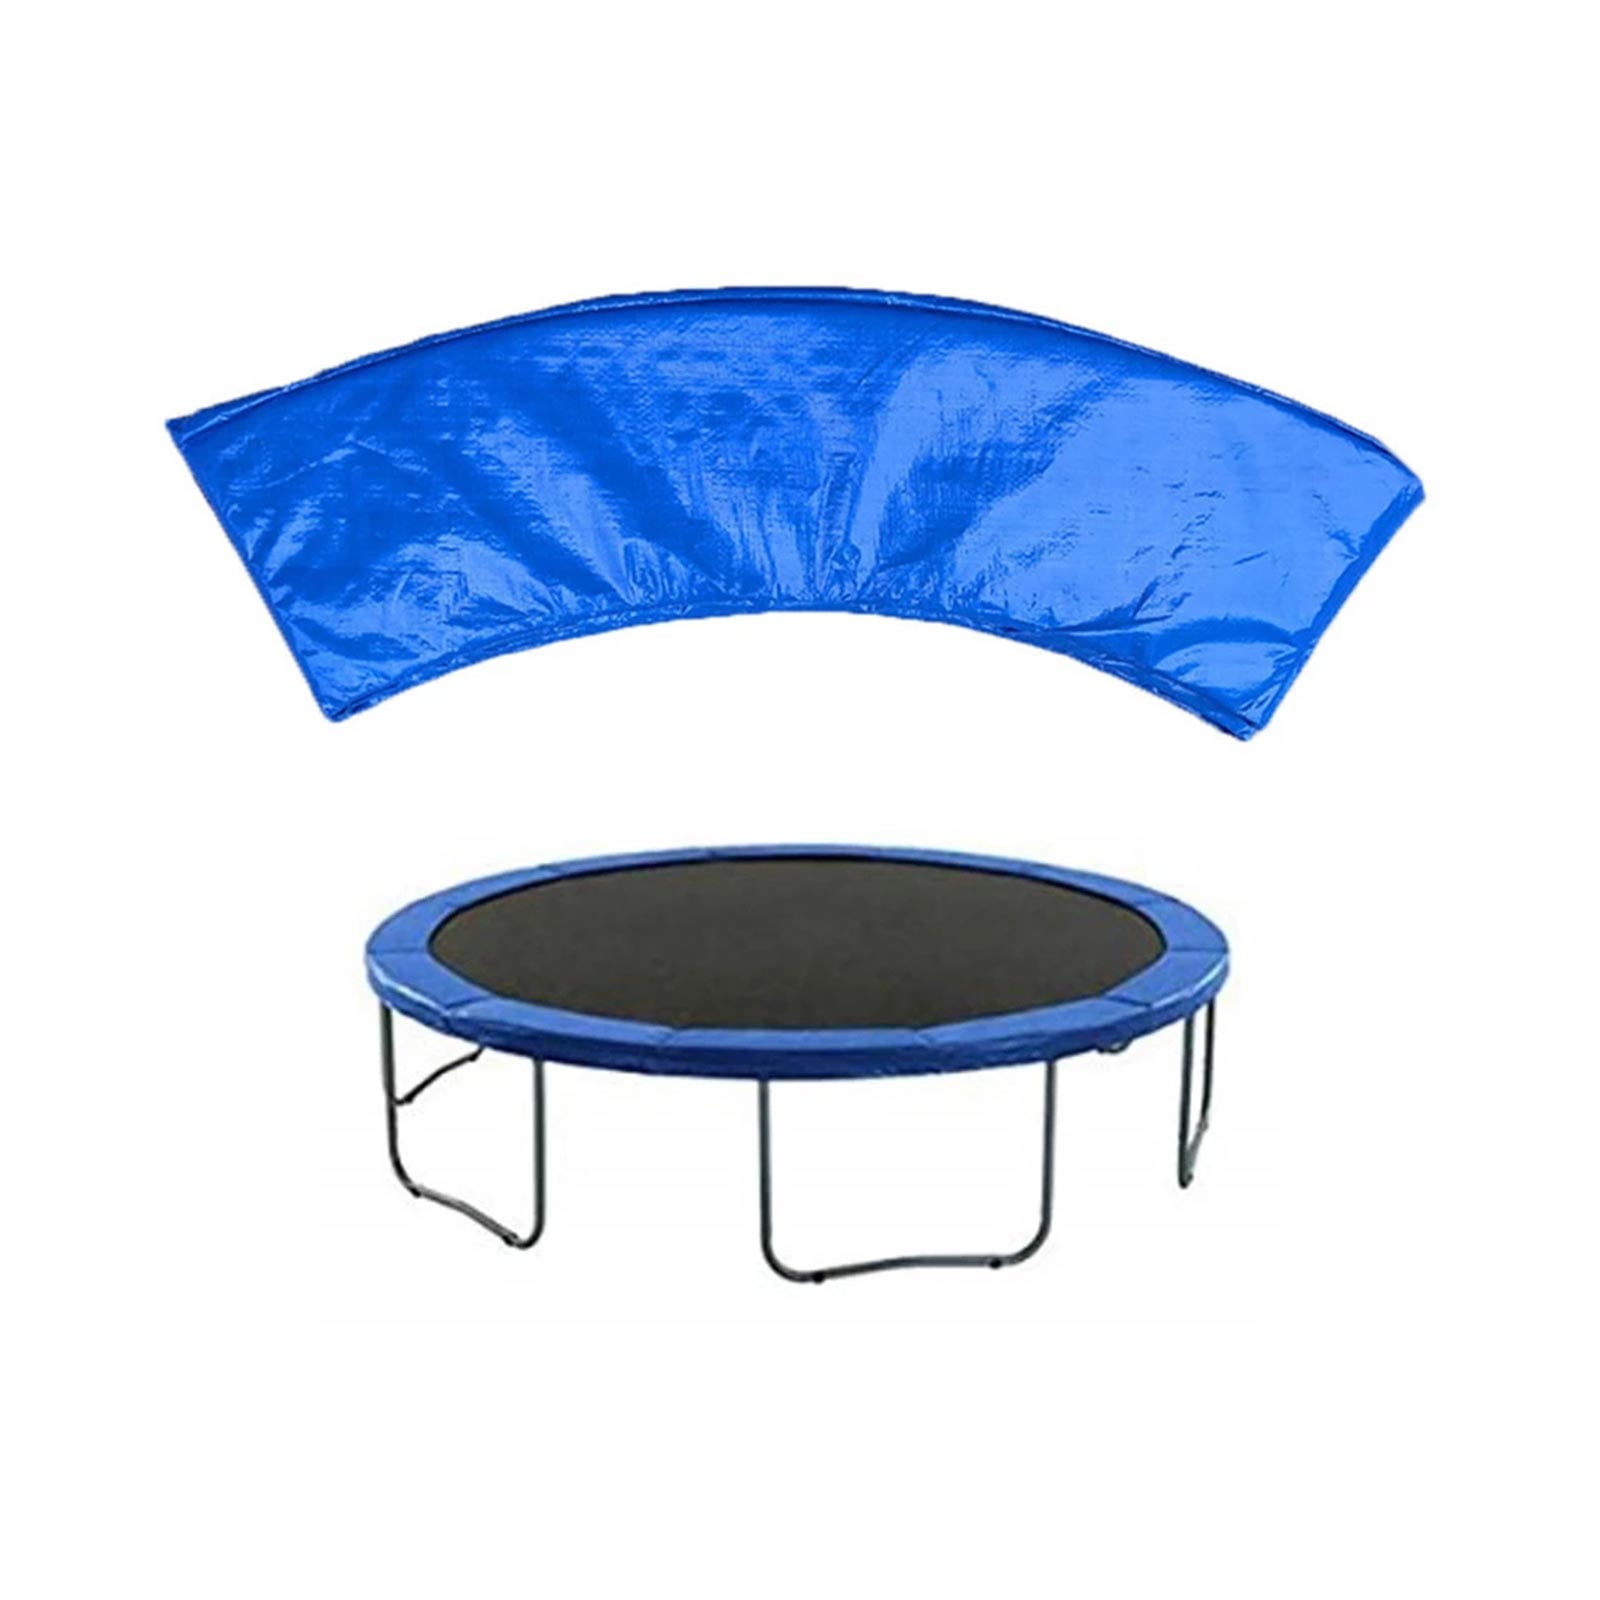 Trampoline Surround Pad Trampoline Safety Guard Replaceable Spring Padding Walmart.com